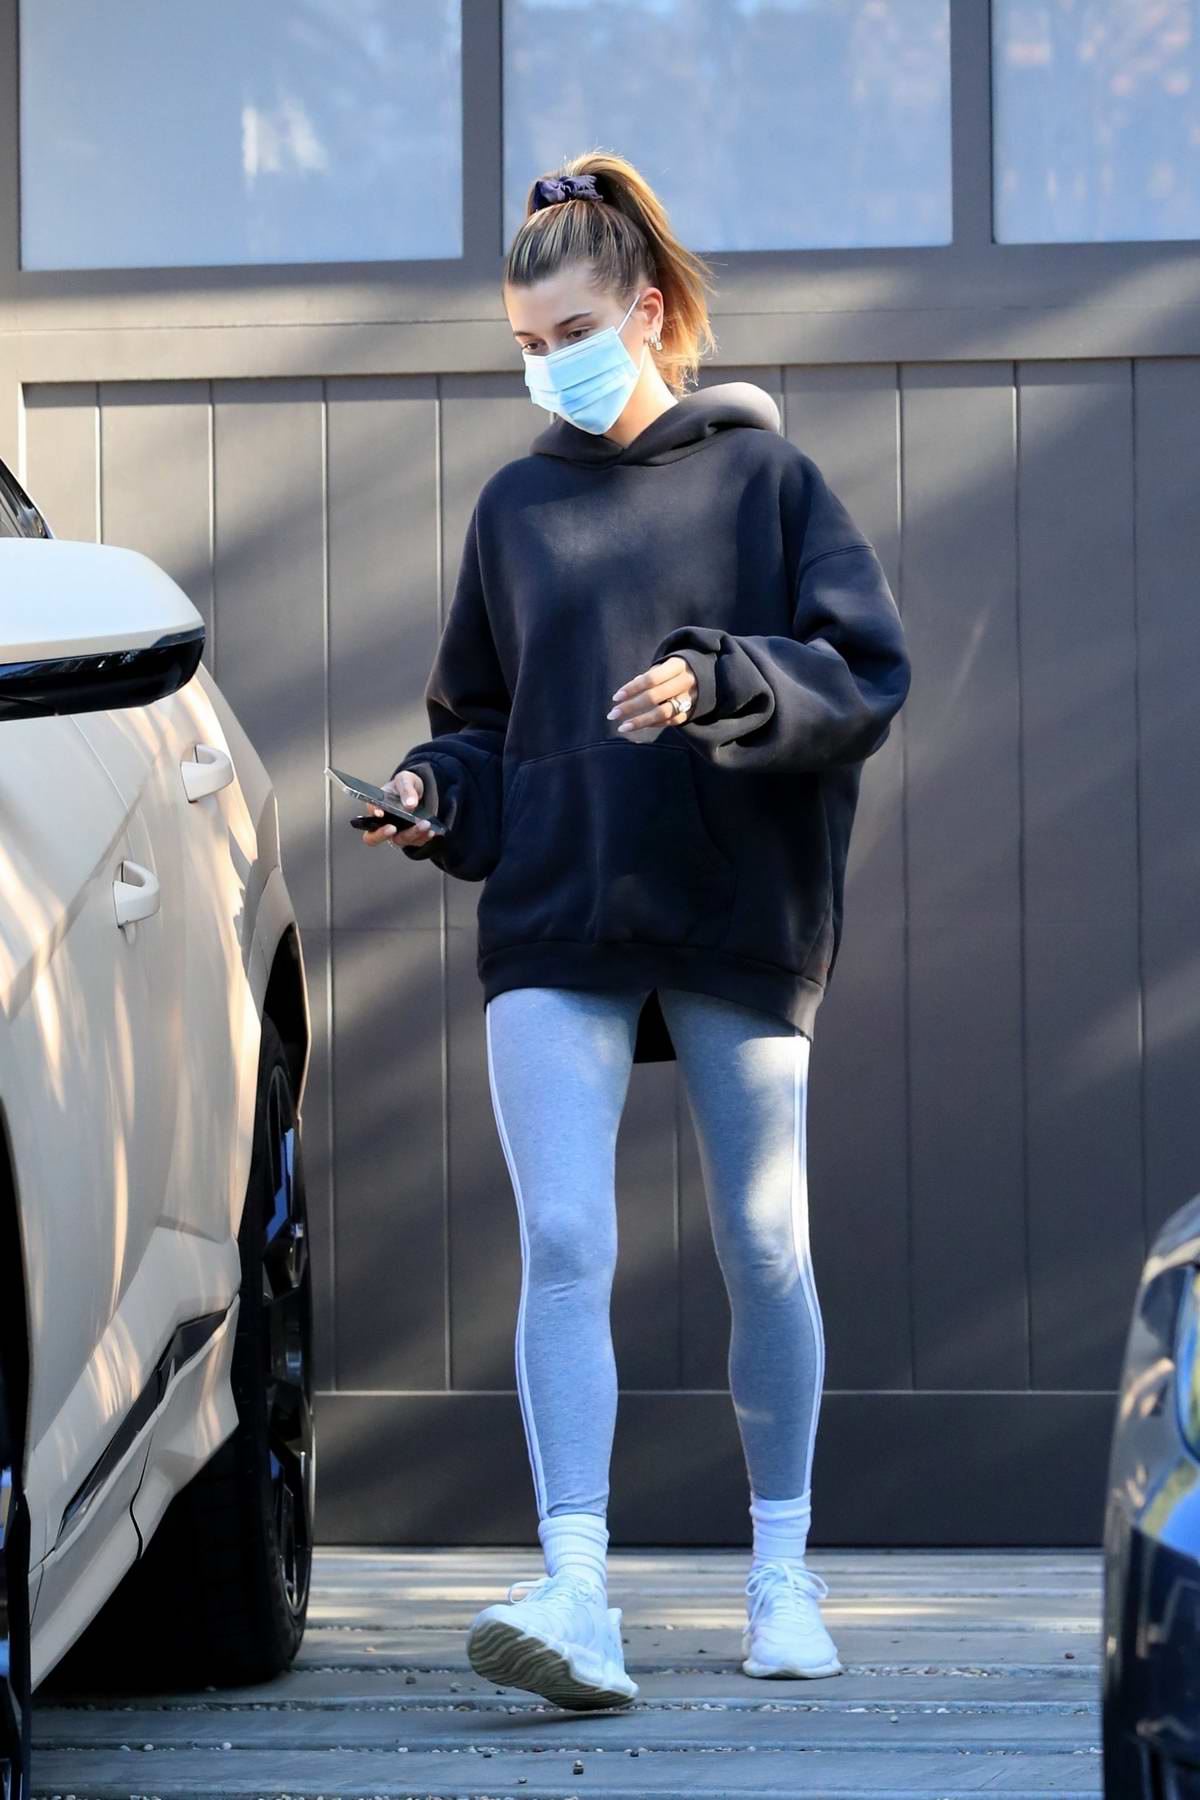 https://www.celebsfirst.com/wp-content/uploads/2020/12/hailey-bieber-sports-a-black-hoodie-and-grey-leggings-as-she-attends-her-yoga-class-before-running-a-few-errands-in-los-angeles-191220_12.jpg